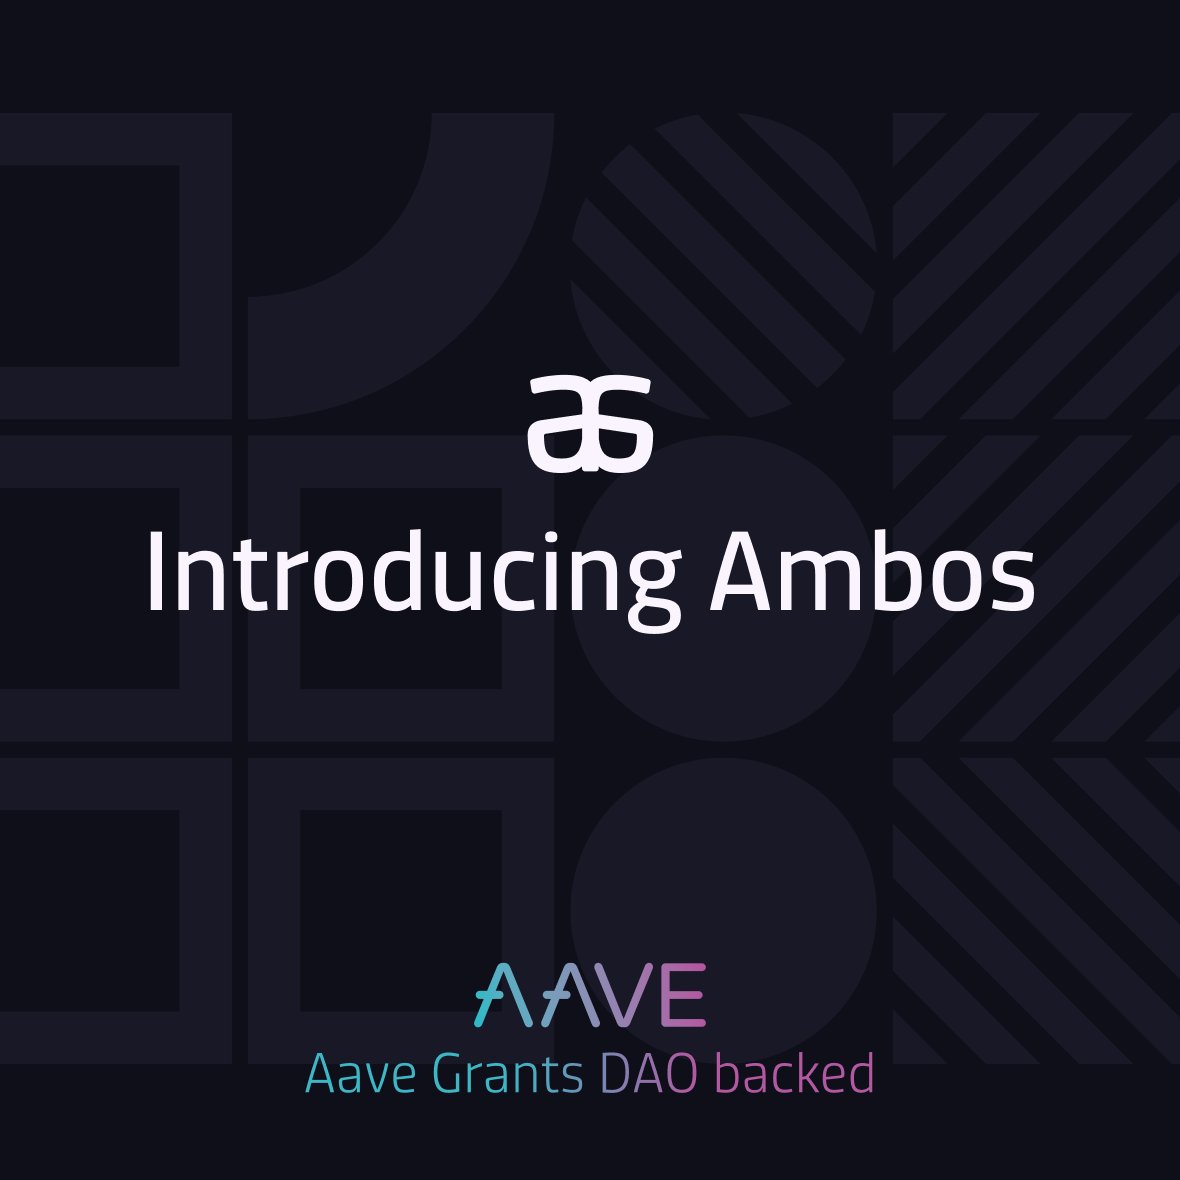 The invite-only release of the app is coming very soon. Ambos plans to give everyone access to instant liquidity, anywhere and anytime. But How? Read our first mirror article: Introducing #Ambos 🪞Mirror: bit.ly/introducingamb… 📃Join the Waitlist: ambos.finance